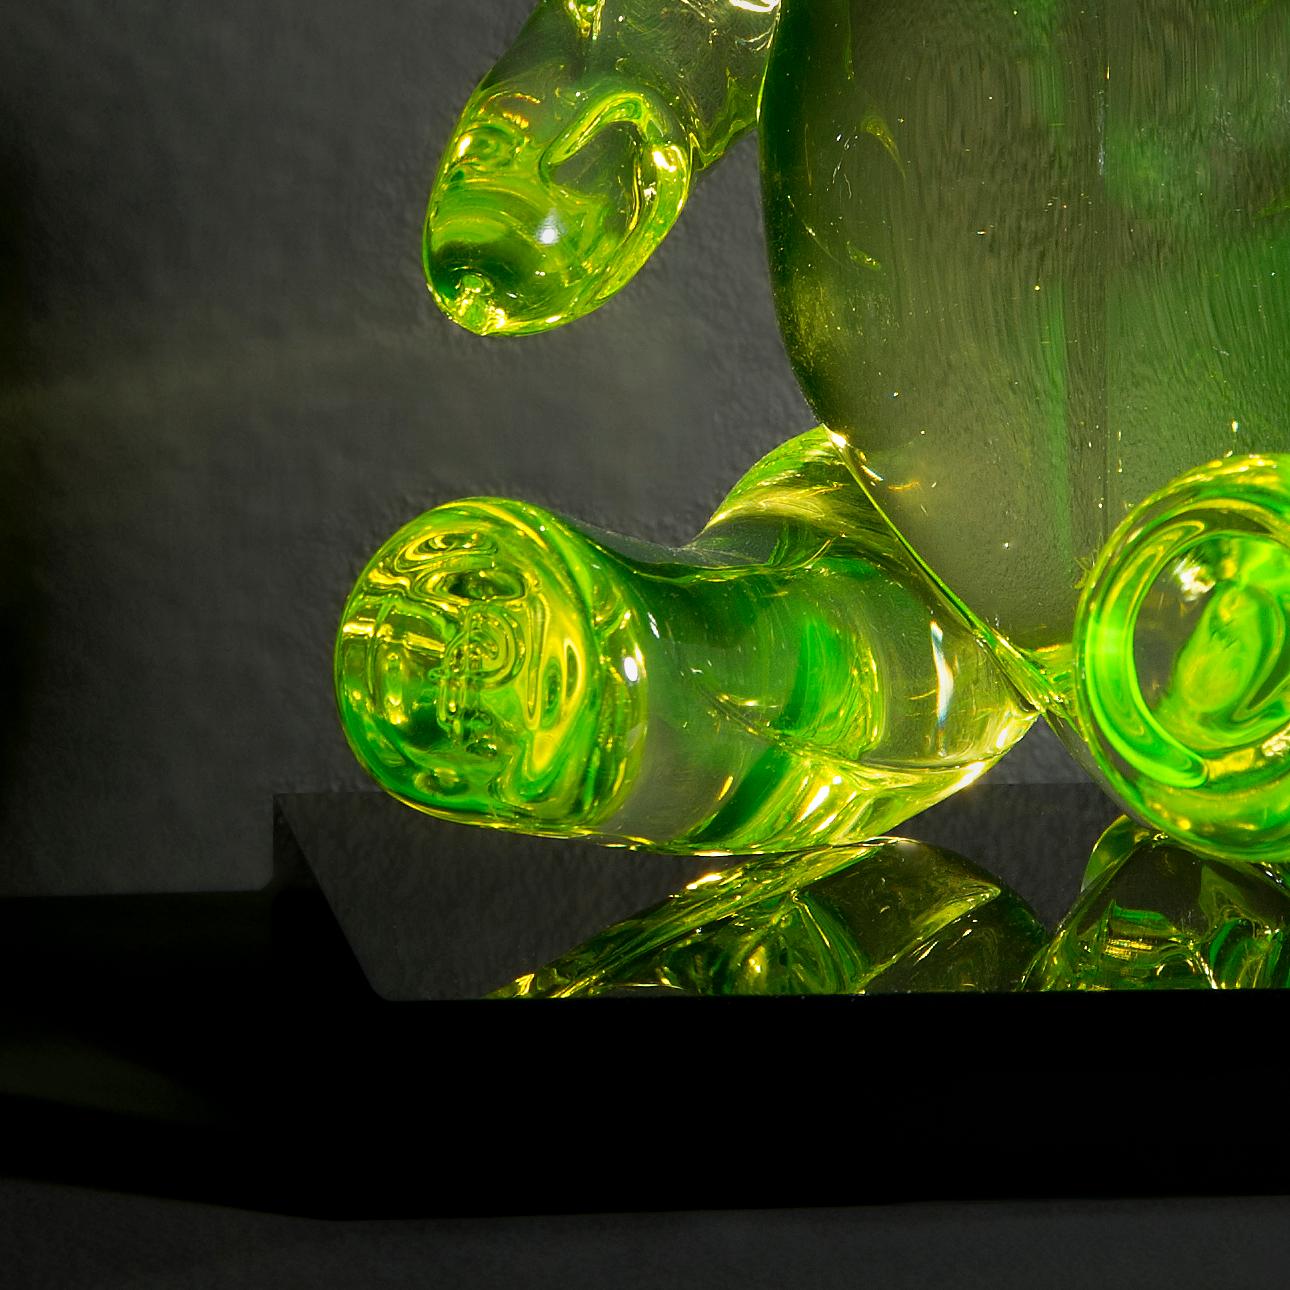 Bear, a unique lime green glass sculpted animal figurine by Elliot Walker 1